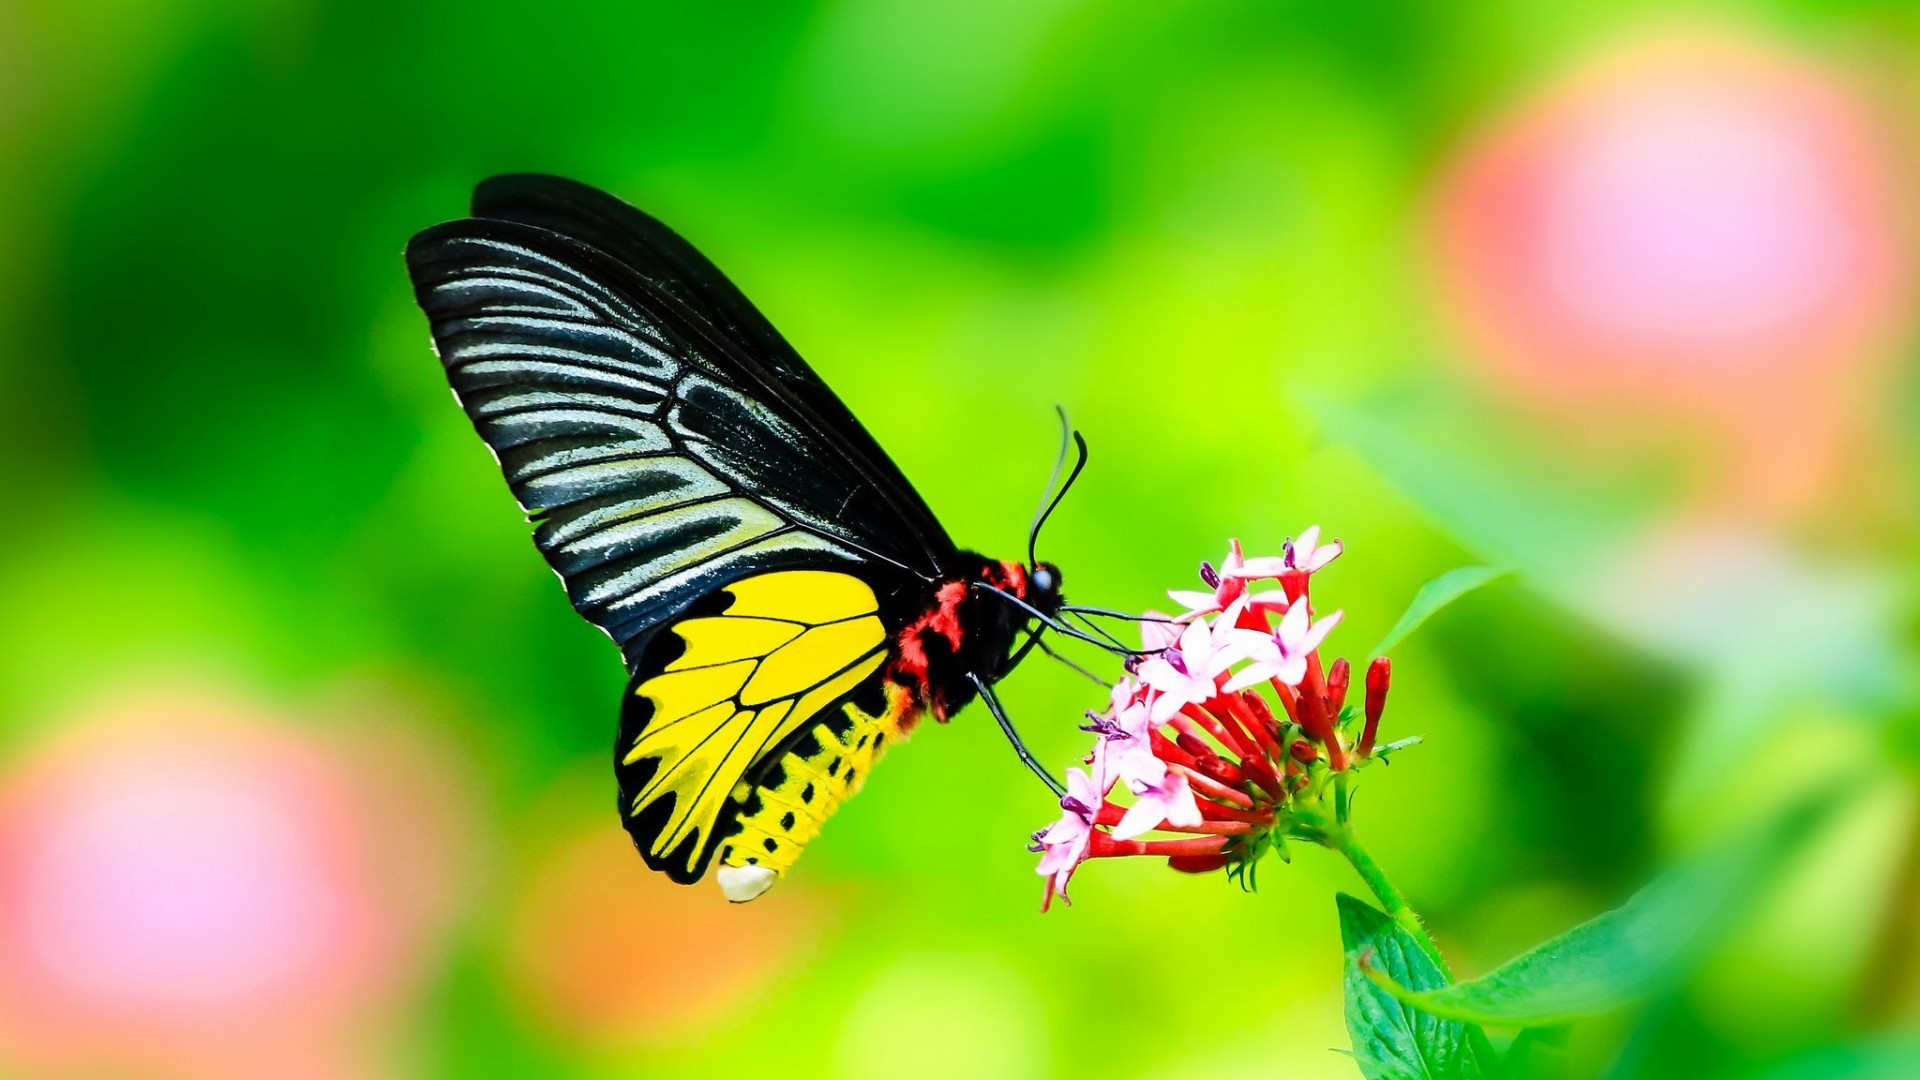 General 1920x1080 butterfly insect macro animals green background